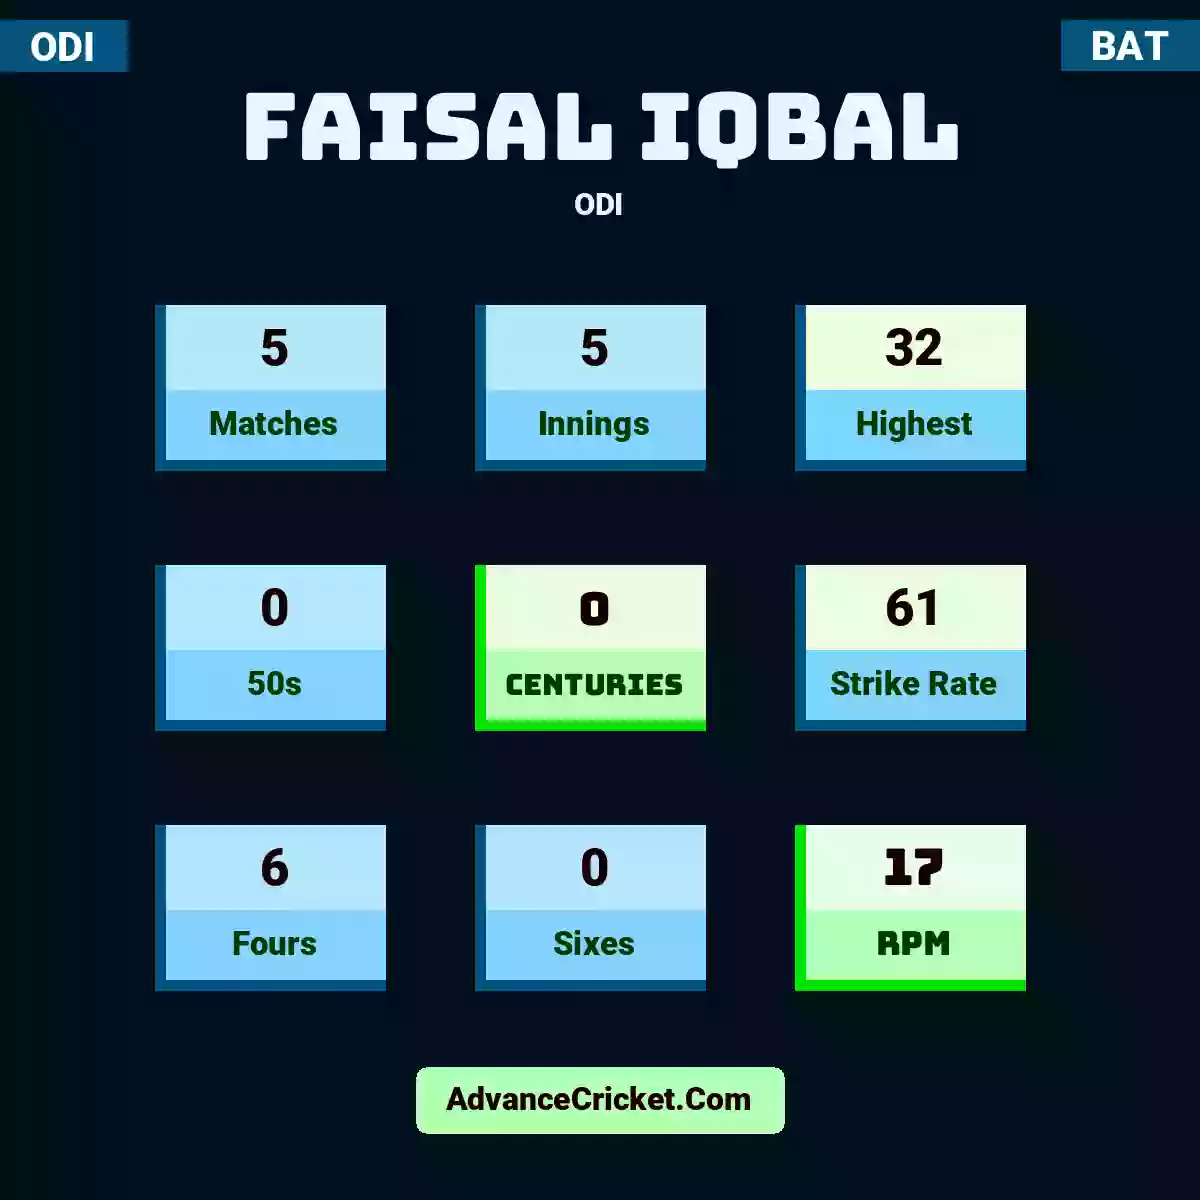 Faisal Iqbal ODI , Faisal Iqbal played 5 matches, scored 32 runs as highest, 0 half-centuries, and 0 centuries, with a strike rate of 61. F.Iqbal hit 6 fours and 0 sixes, with an RPM of 17.